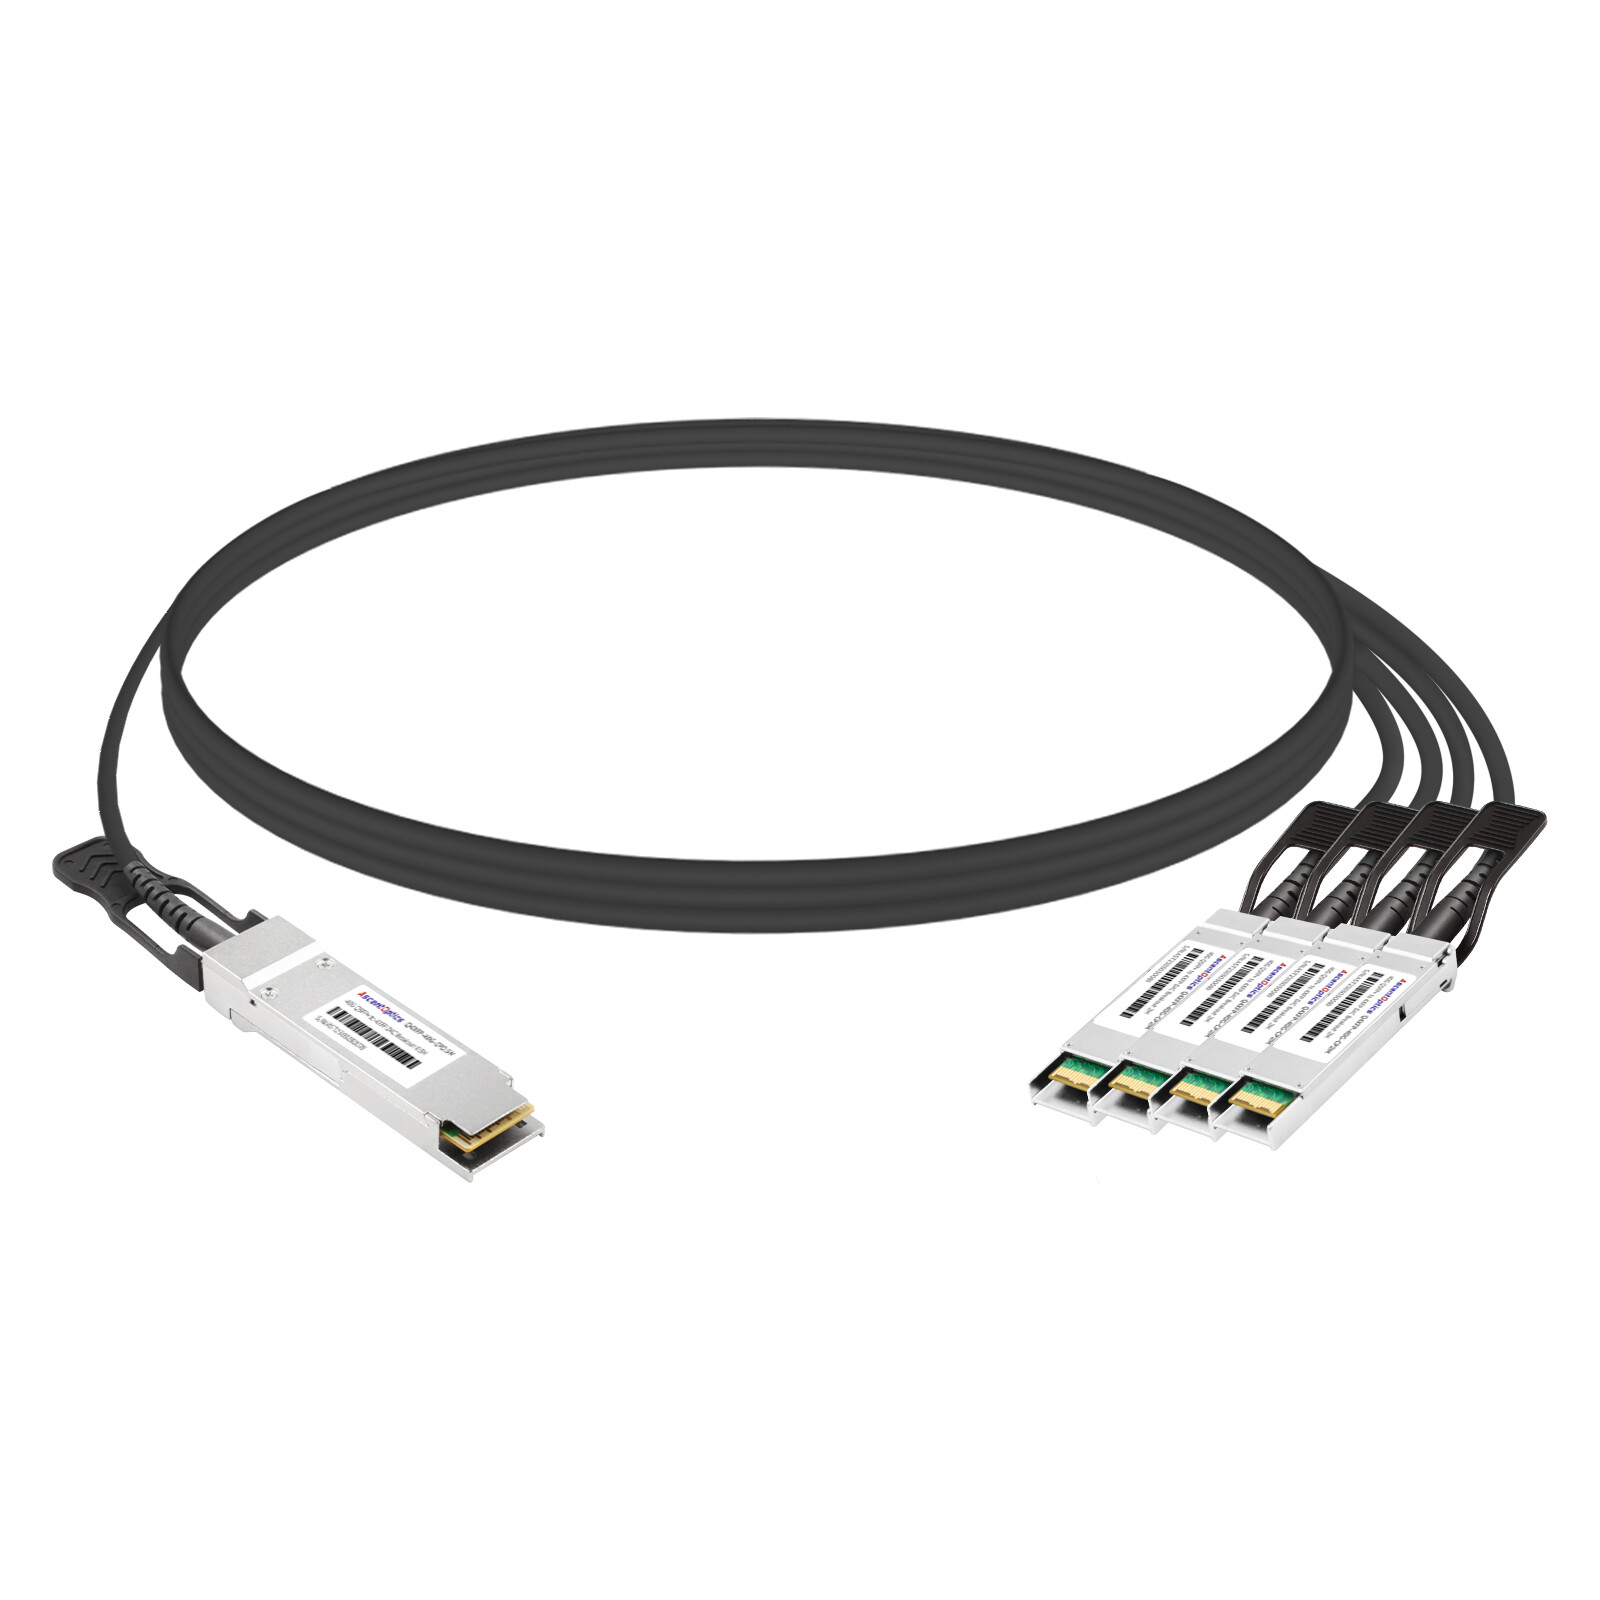 40G QSFP+ to 4x 10G XFP Copper Breakout Cable,0.5 Meter,Passive